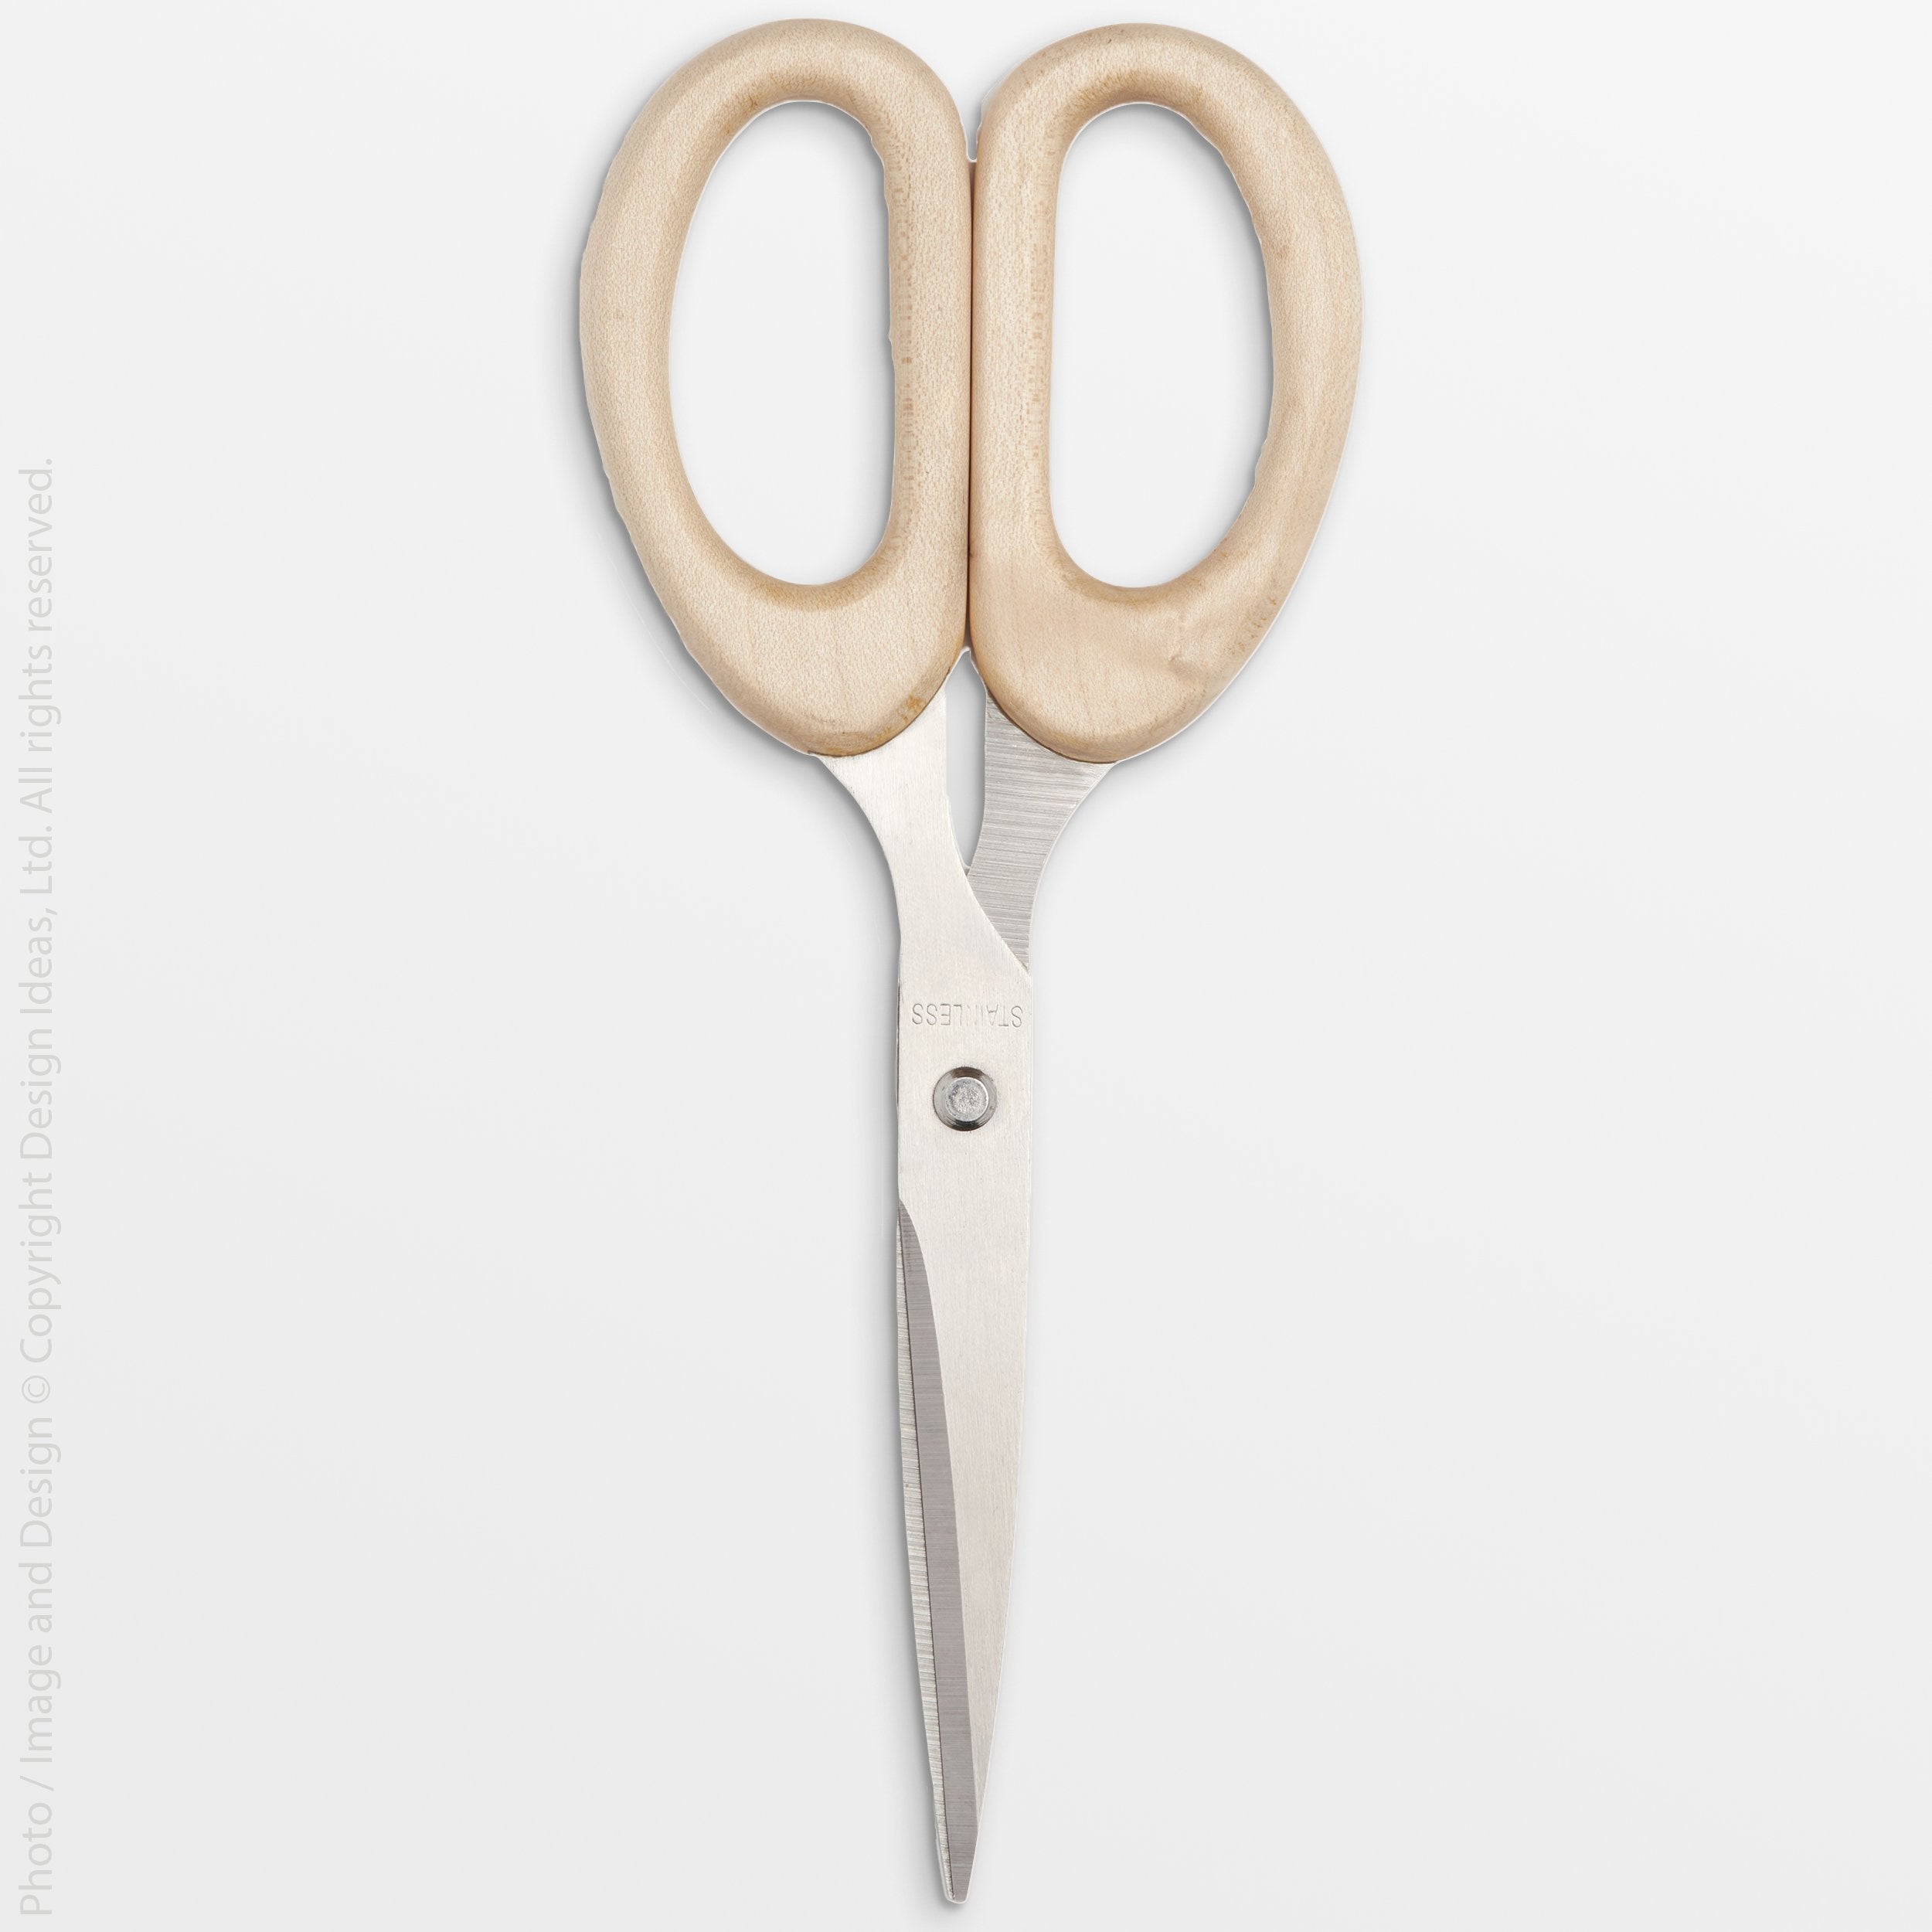 Upland Sycamore Scissors - Natural Color | Image 1 | From the Upland Collection | Expertly created with natural sycamore for long lasting use | Available in natural color | texxture home